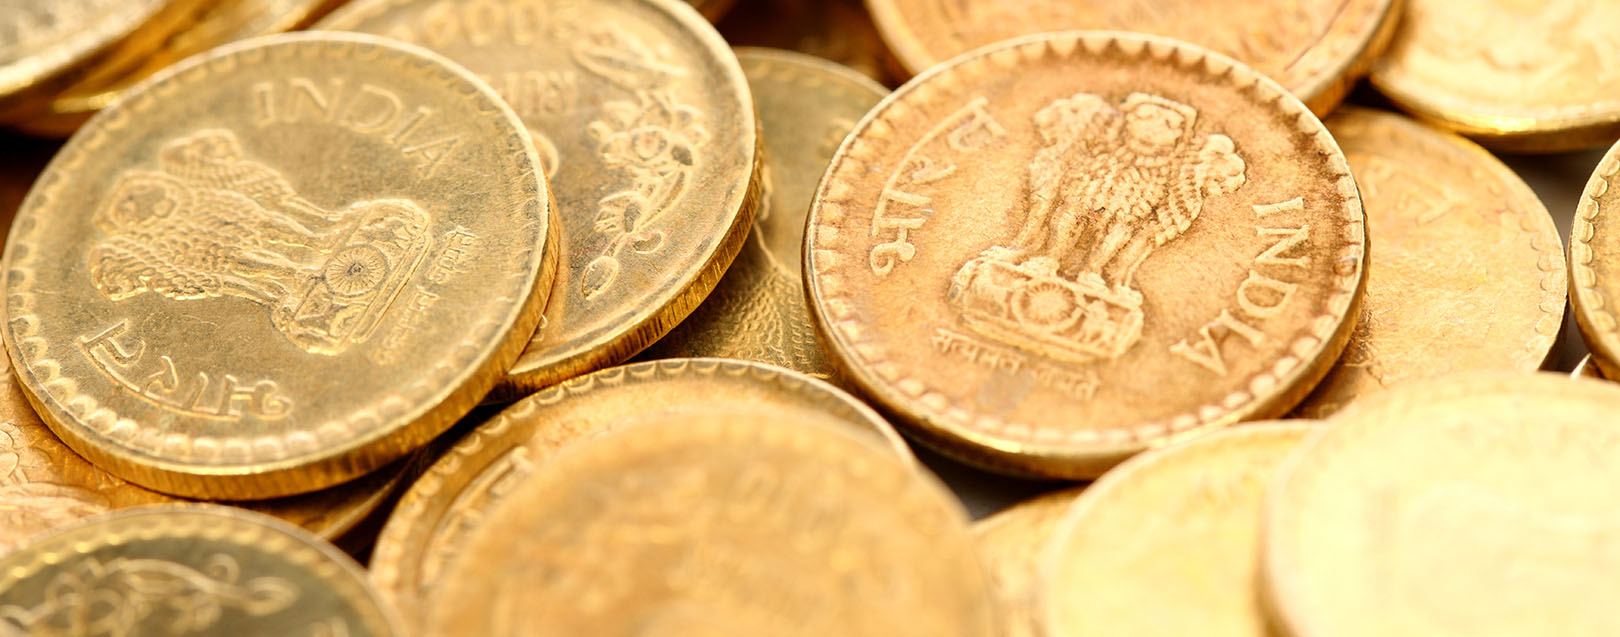 MMTC to partner with SBI to sell Indian Gold Coin